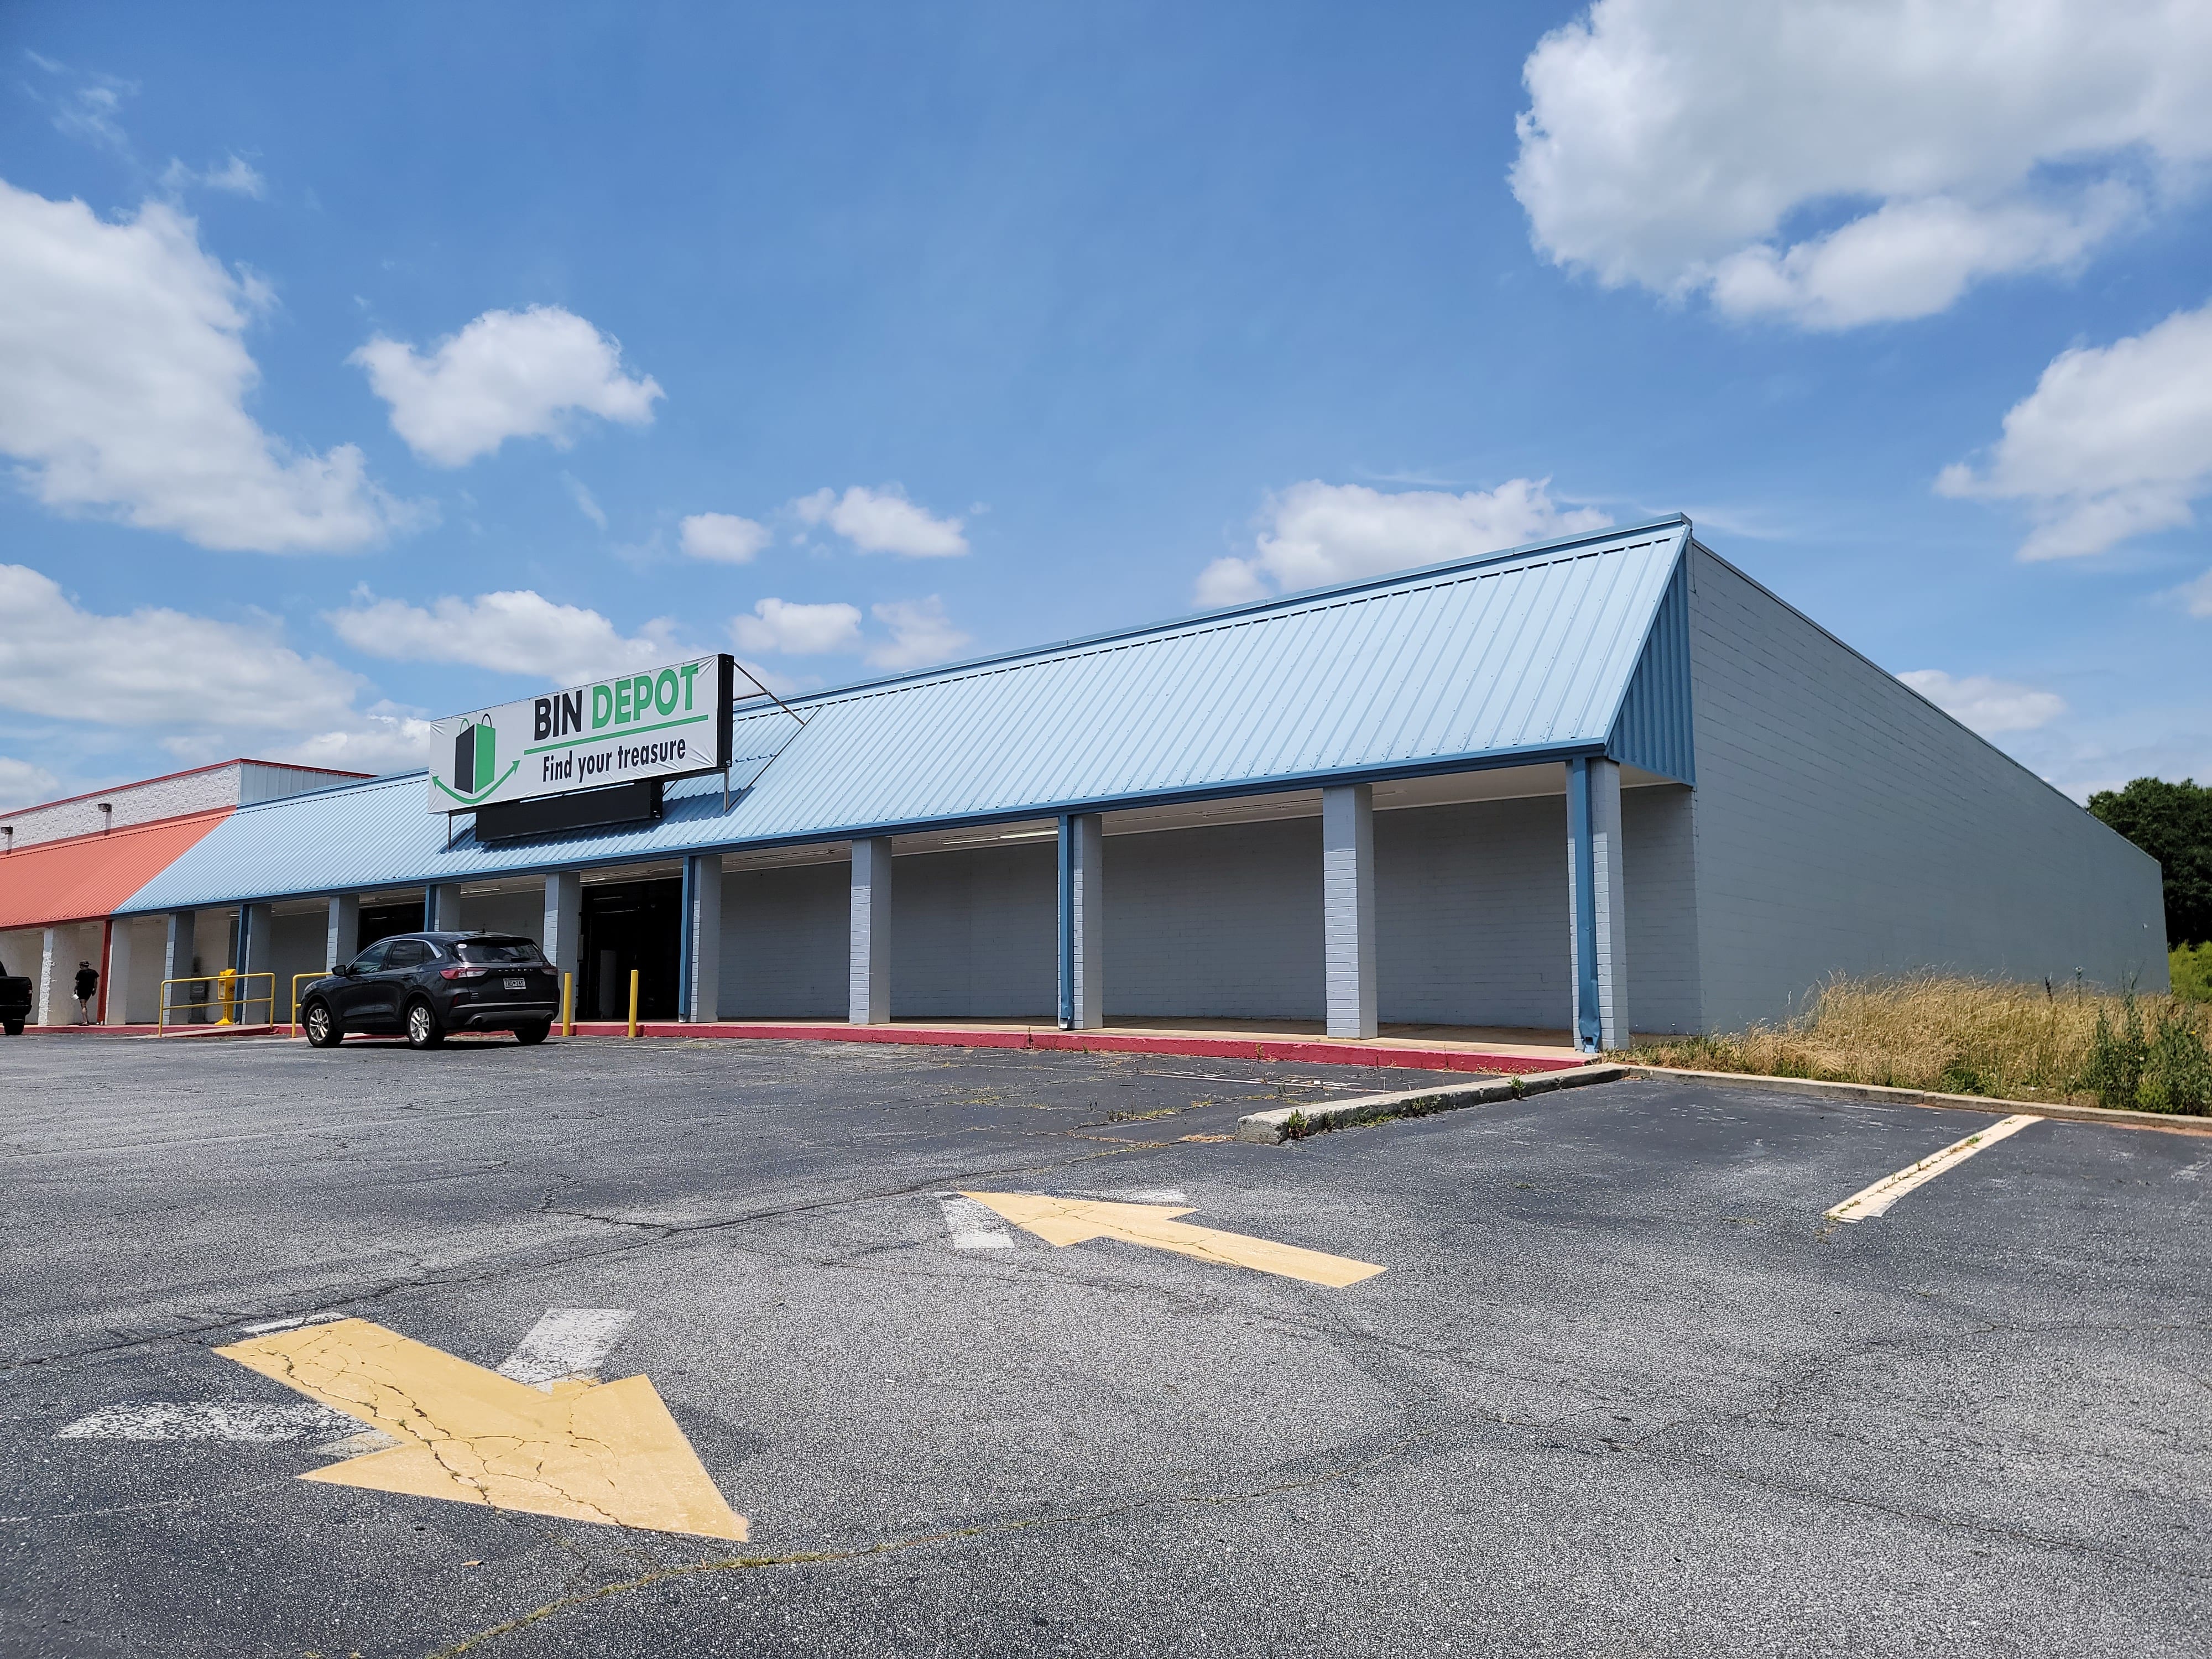 Commercial Properties for Sale or Lease in Greenville, SC